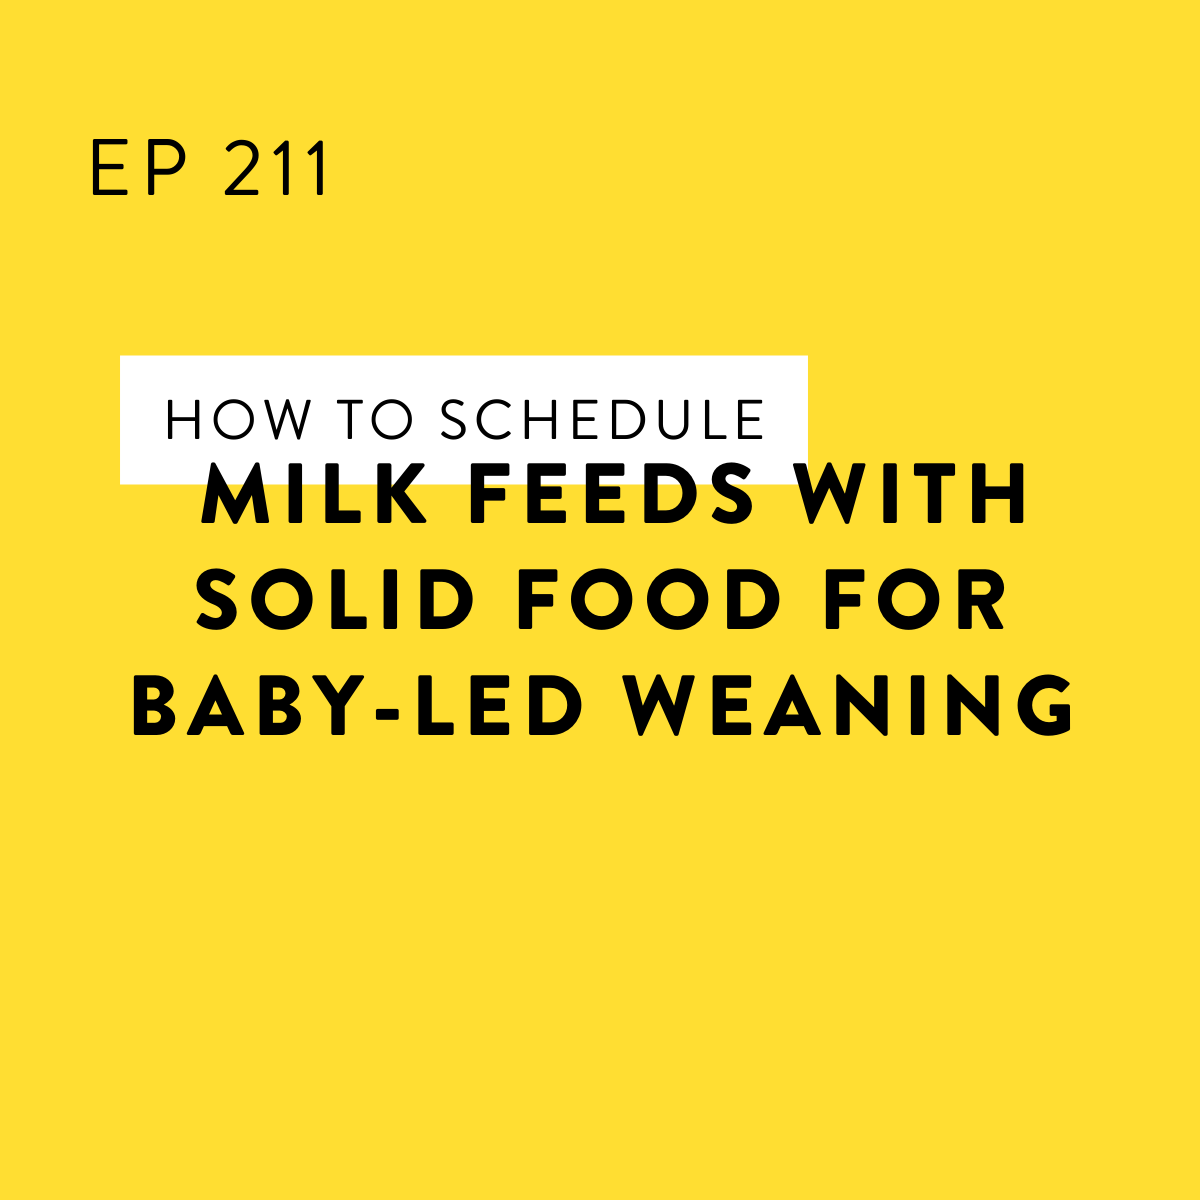 The most fun baby led weaning program for you and your baby to complet